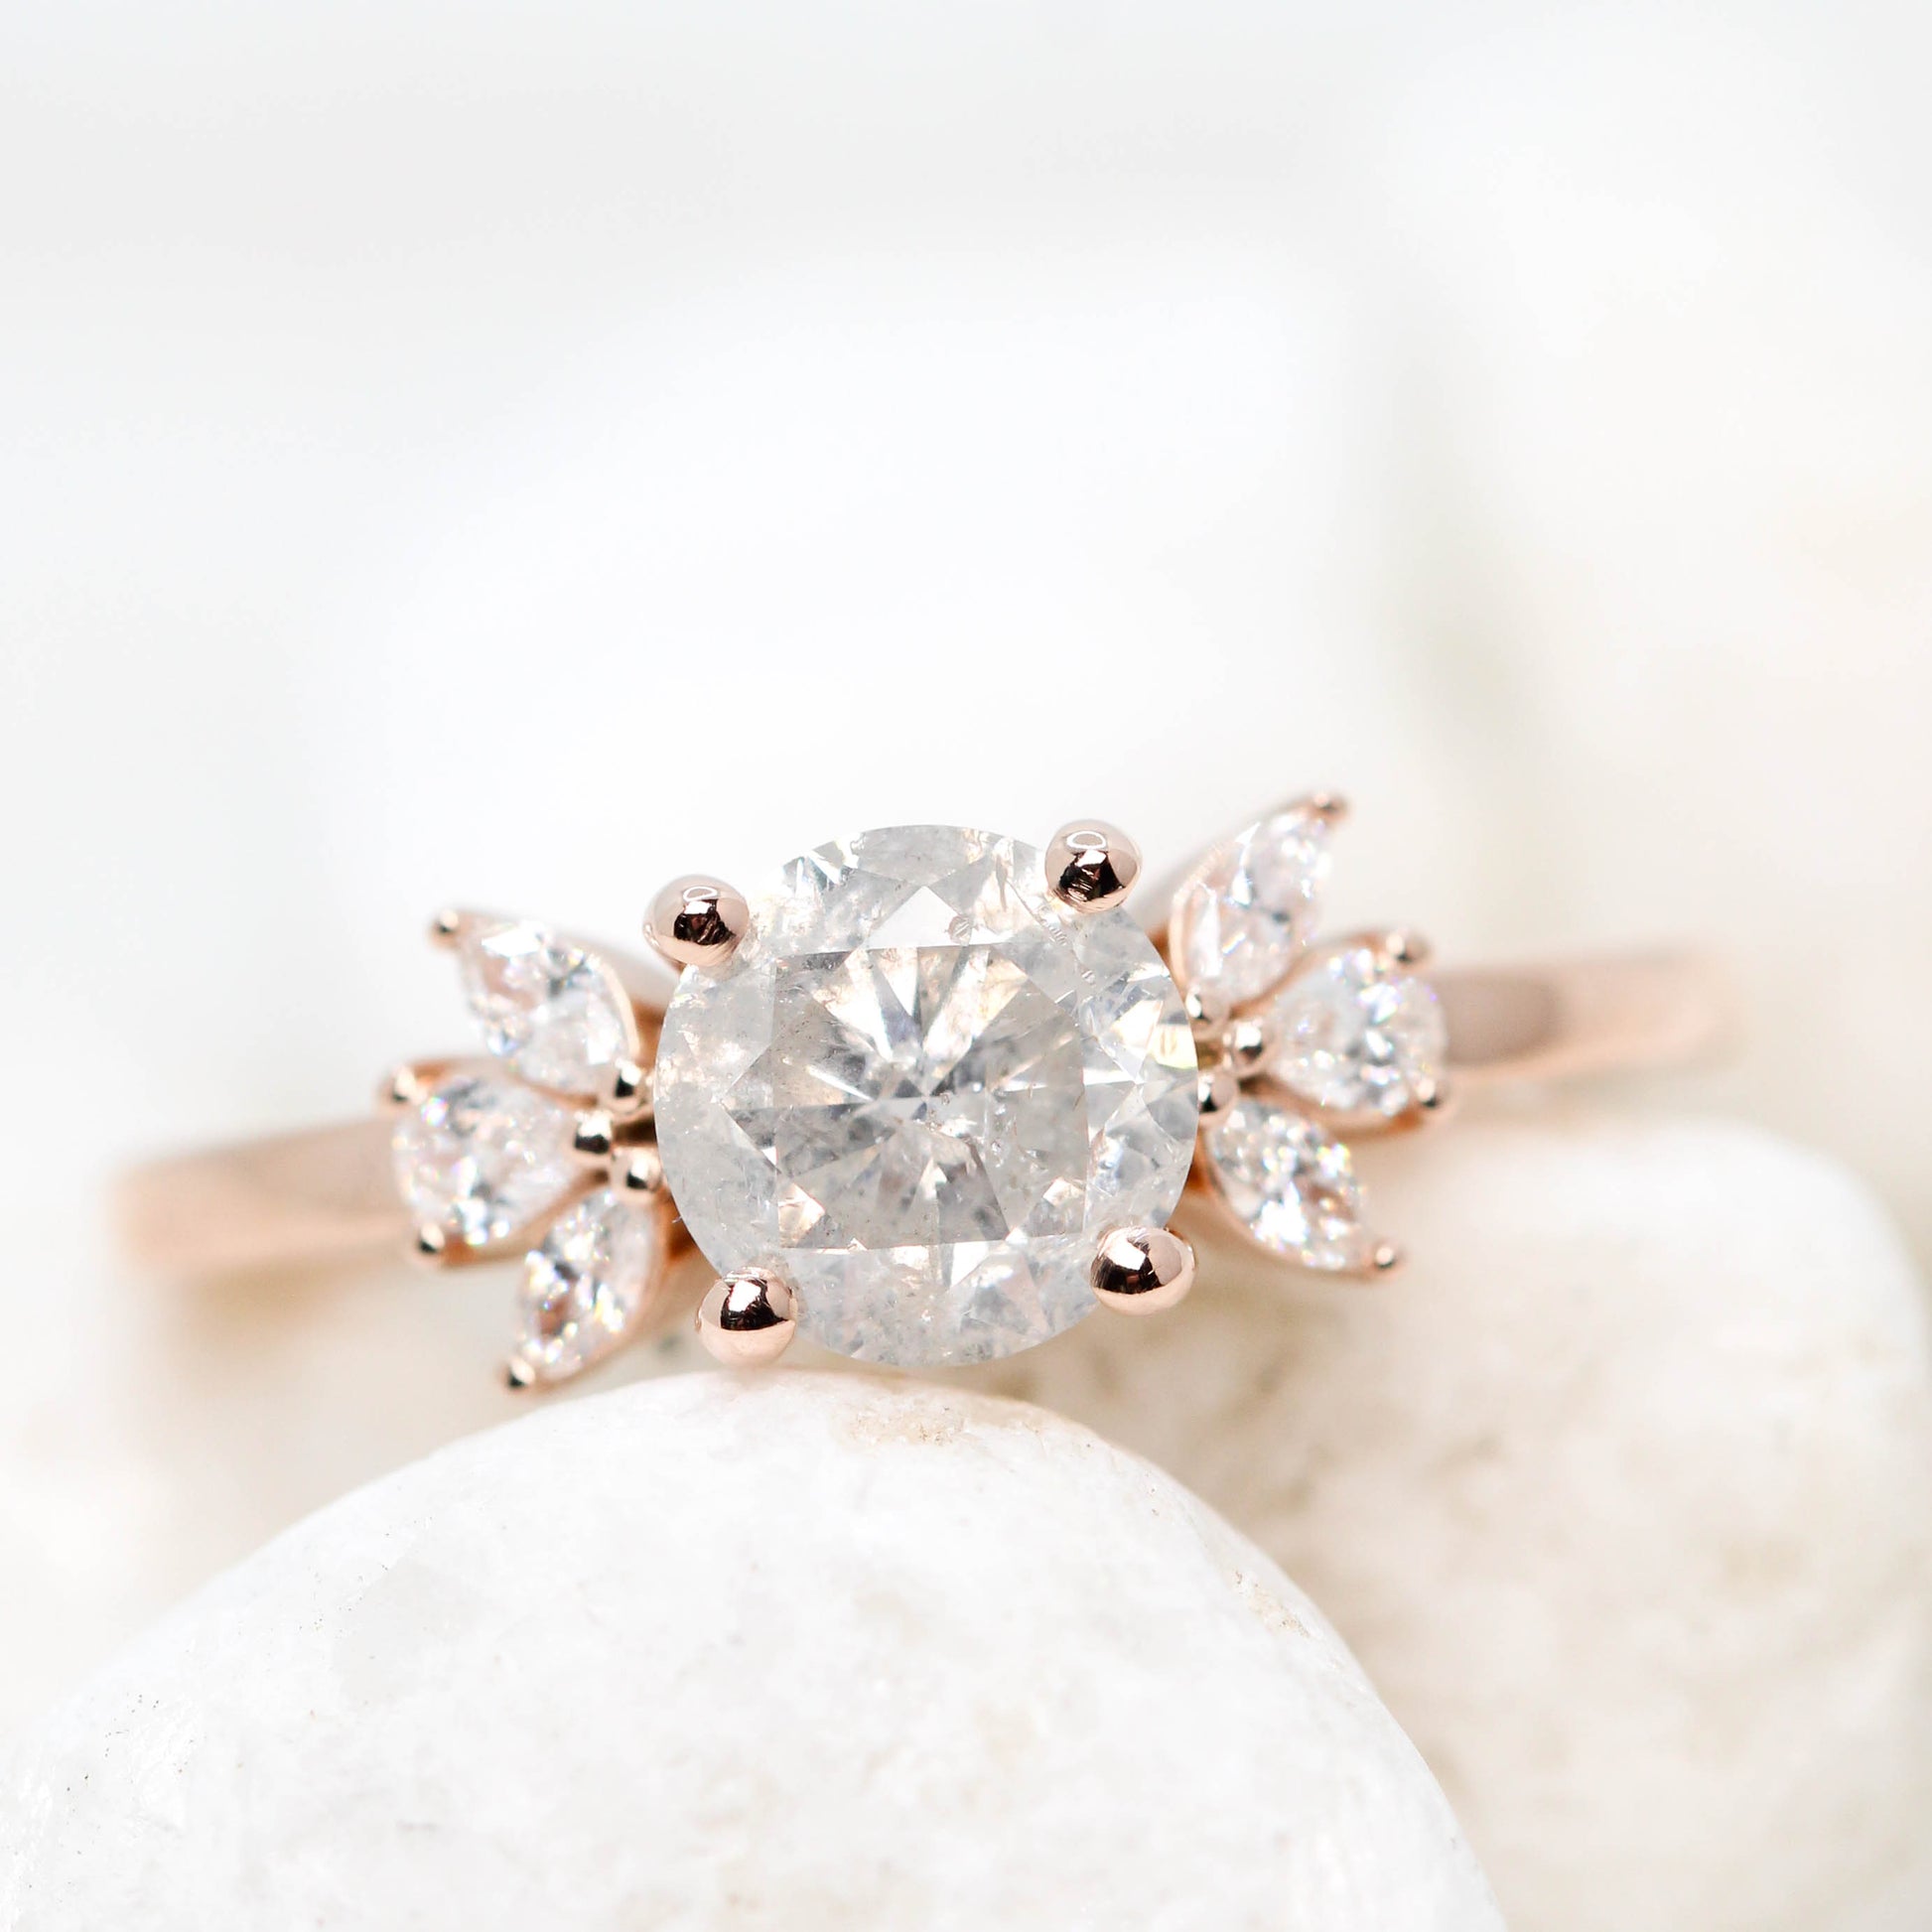 Kendra Ring with a 1.17 Carat Round Bright Gray Salt and Pepper Diamond with White Diamond Accents in 14k Rose Gold - Ready to Size and Ship - Midwinter Co. Alternative Bridal Rings and Modern Fine Jewelry